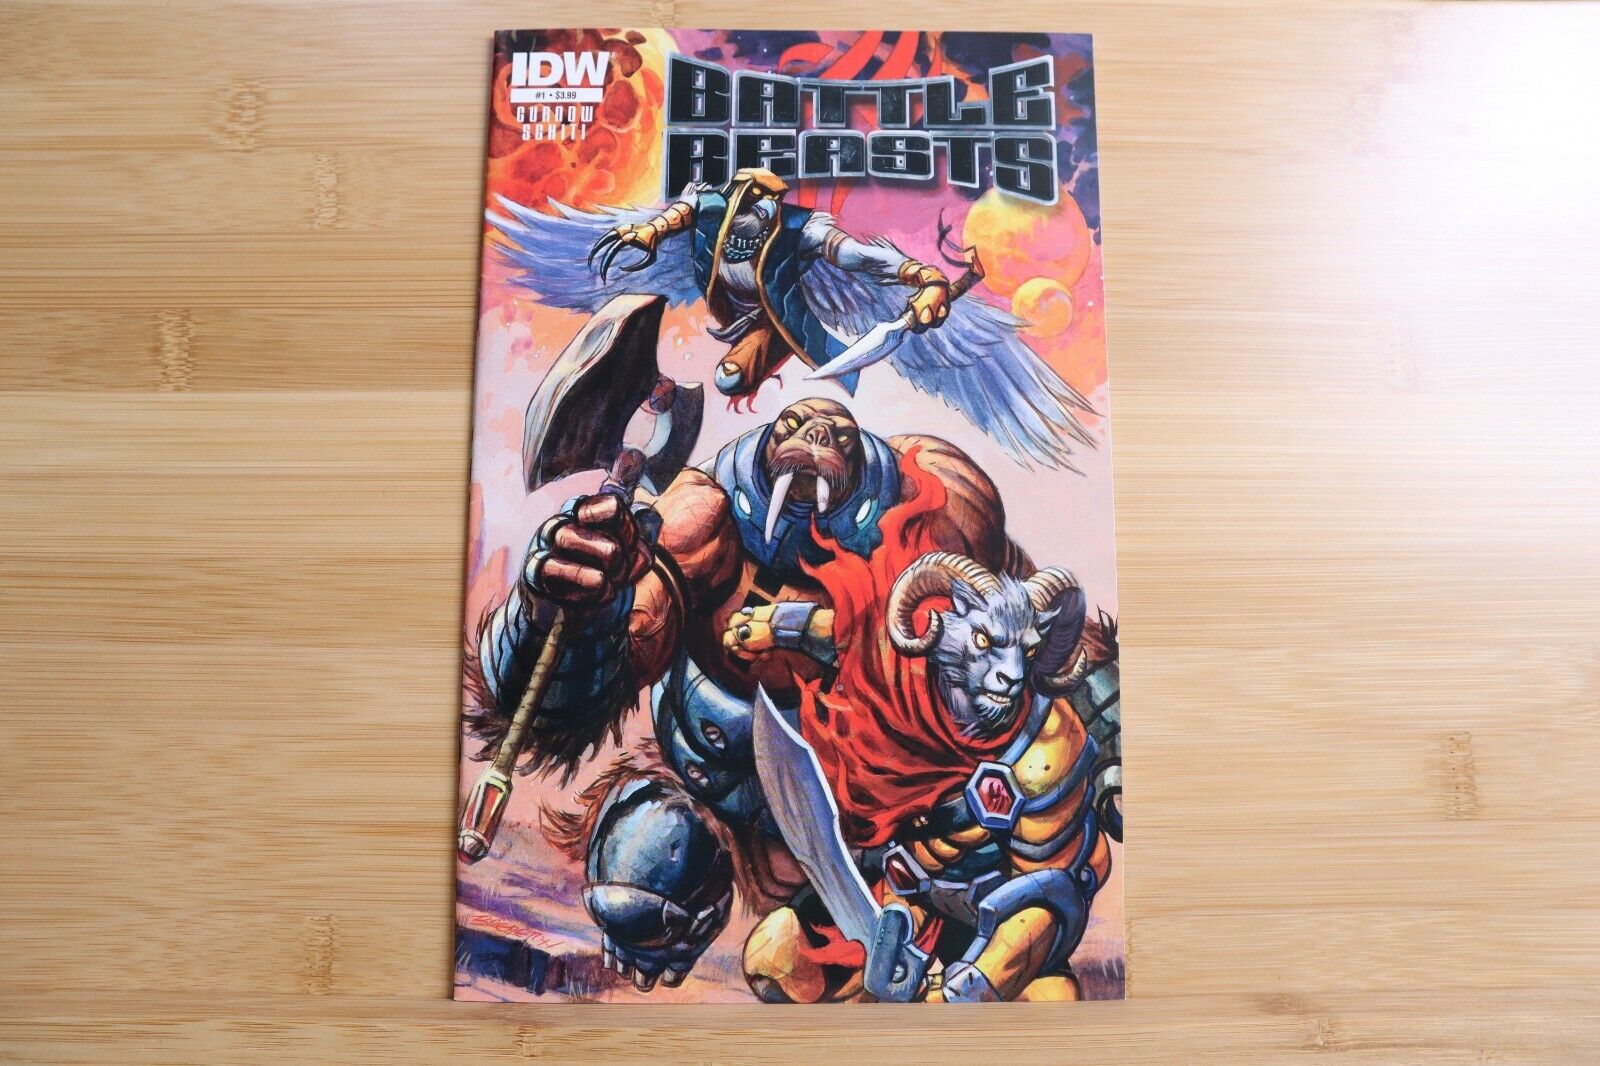 Battle Beasts #1 2nd Series IDW VF/NM - 2012